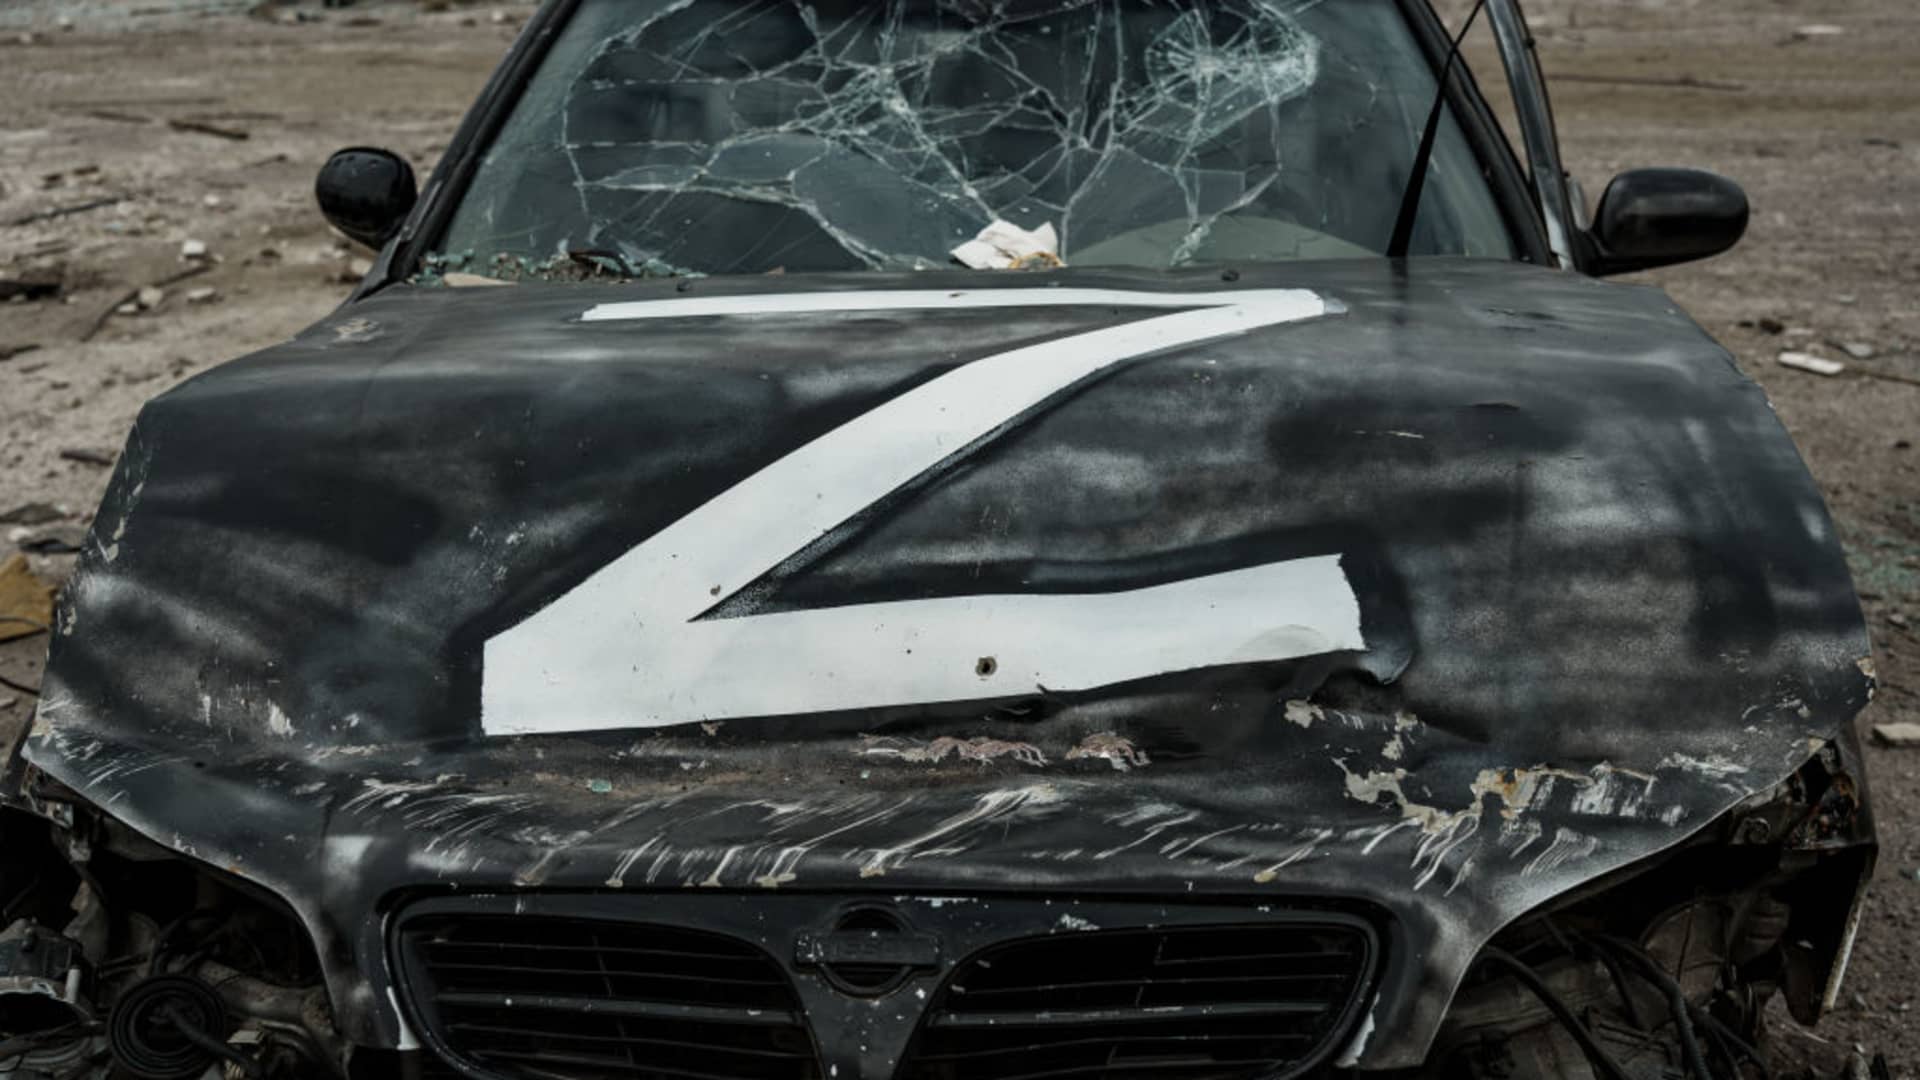 Wreckage of a car marked with a Russian military symbol “Z” at a Russian military base, which Ukrainian forces destroyed by HIMARS during a counteroffensive in Kharkiv Oblast, on Sept. 26, 2022 in Balakliia, Ukraine. Balakliia was under Russian occupation for half a year. On Sept. 10, Ukraine's armed forces liberated the city.